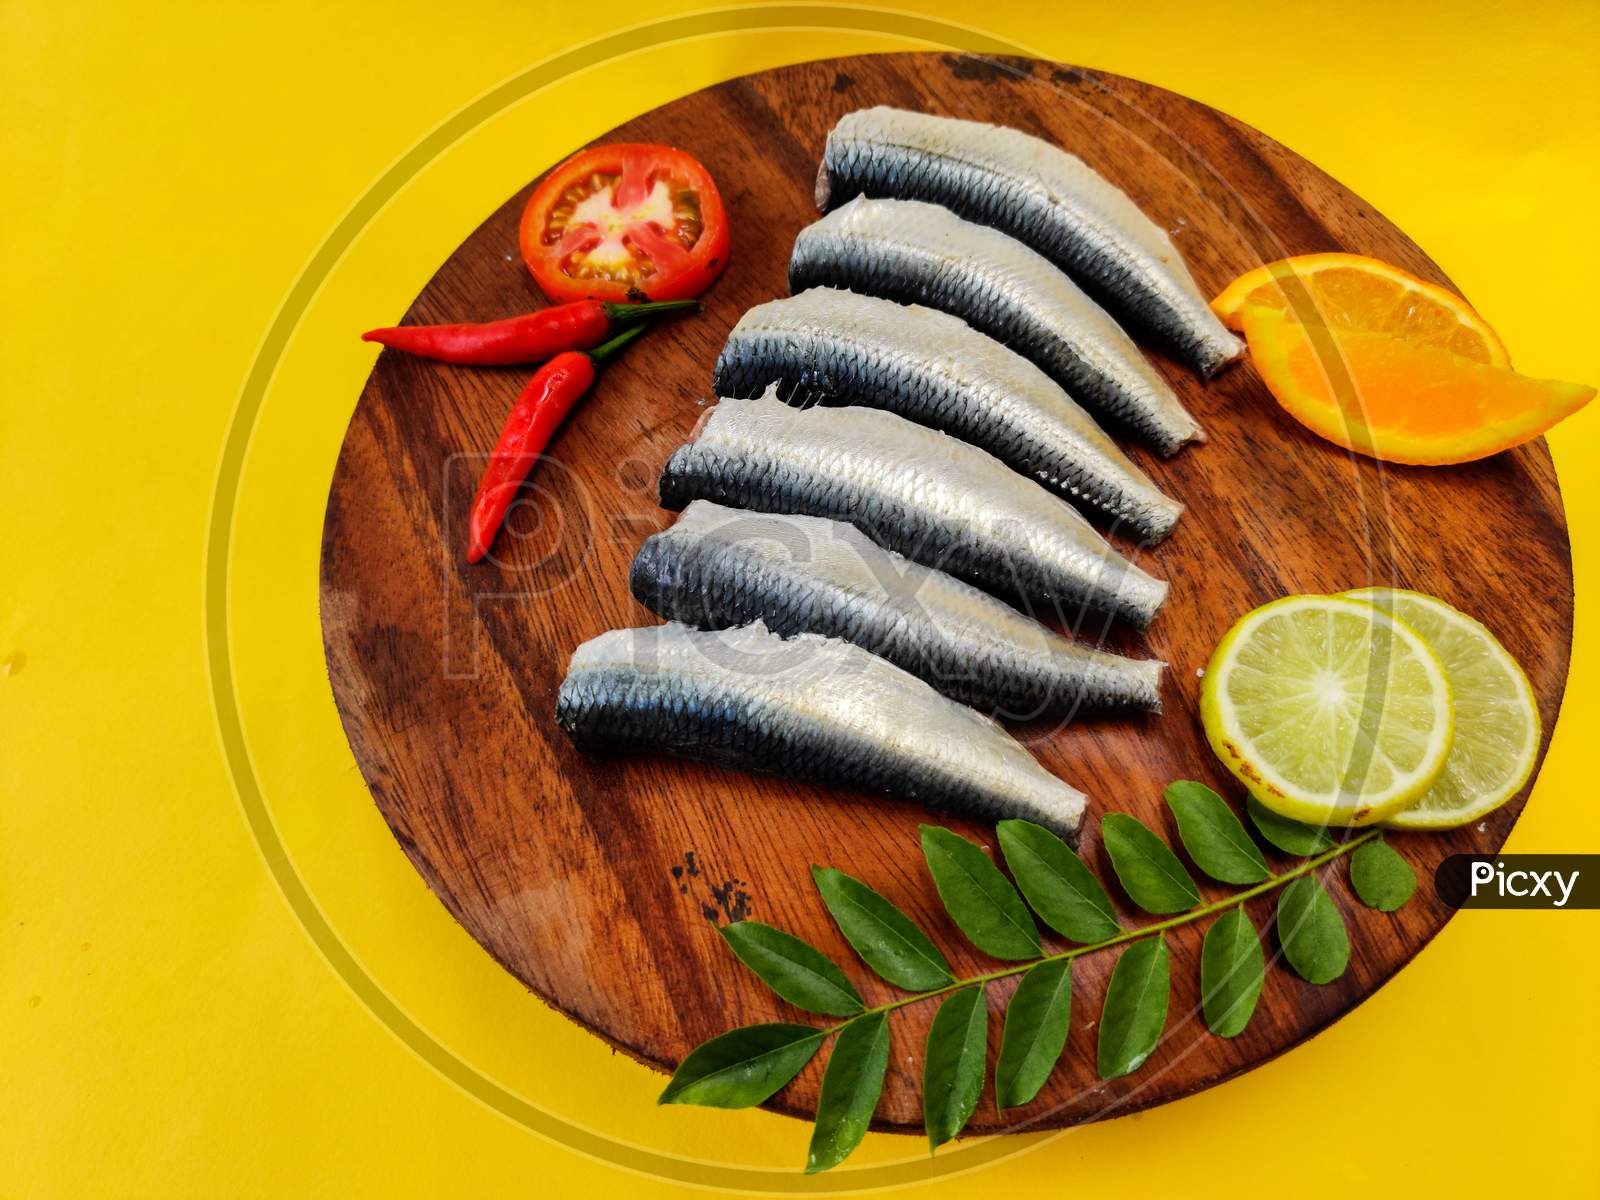 Cleaned And Ready To Cook Fresh Indian Oil Sardine (Sardinella Longipces) On A Wooden Pad With Curry Leaves,Tomato Slice And Red Chilli.Isolated On Yellow Background.